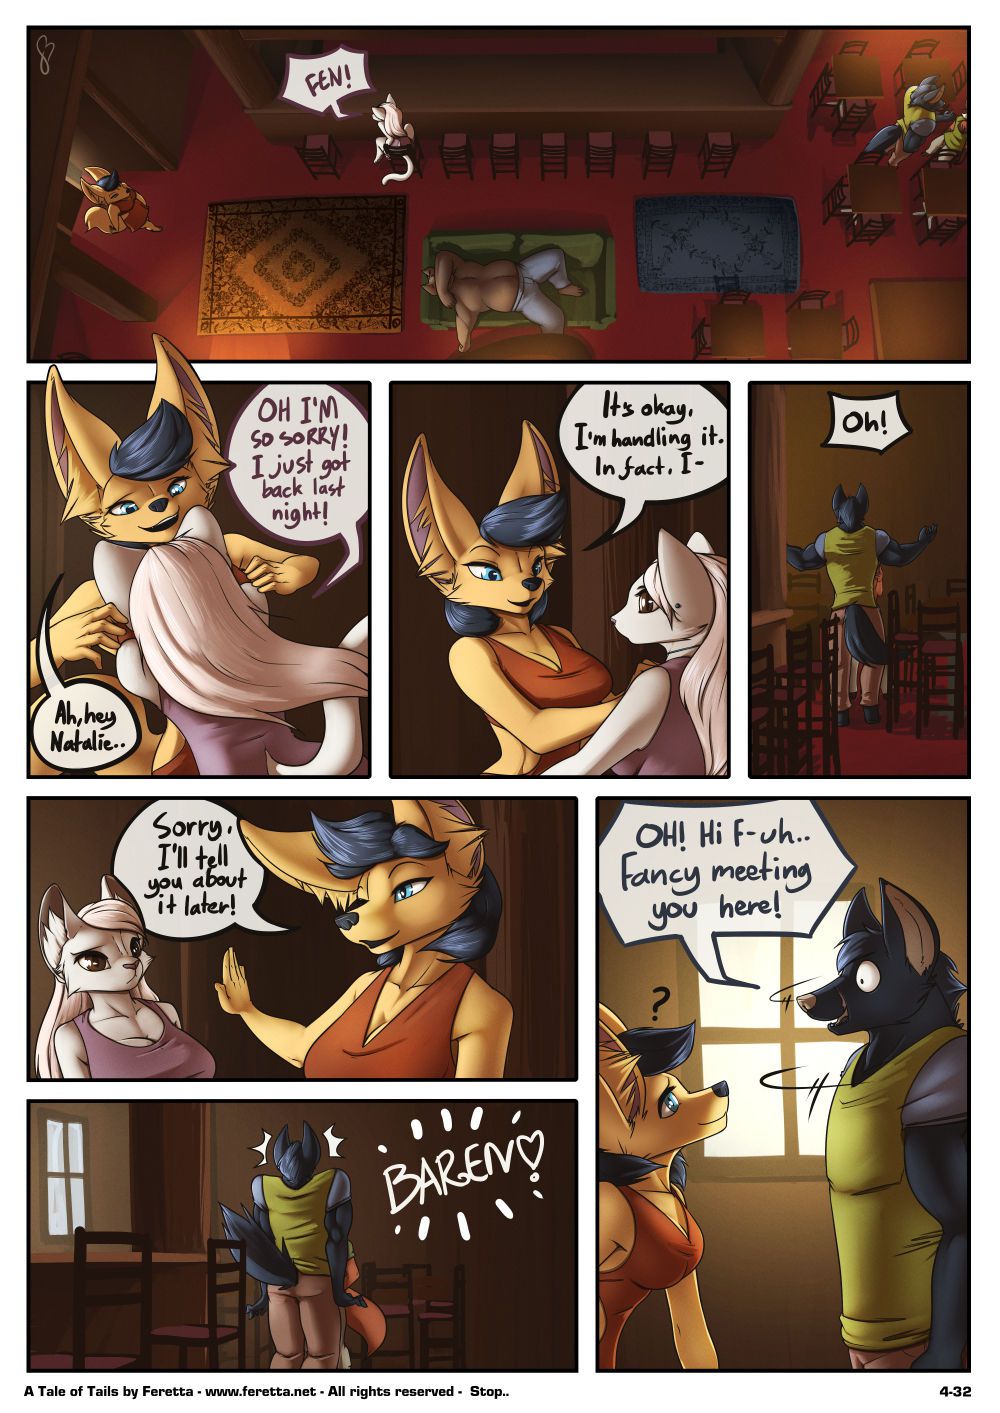 [Feretta] A Tale of Tails (Ongoing) 182